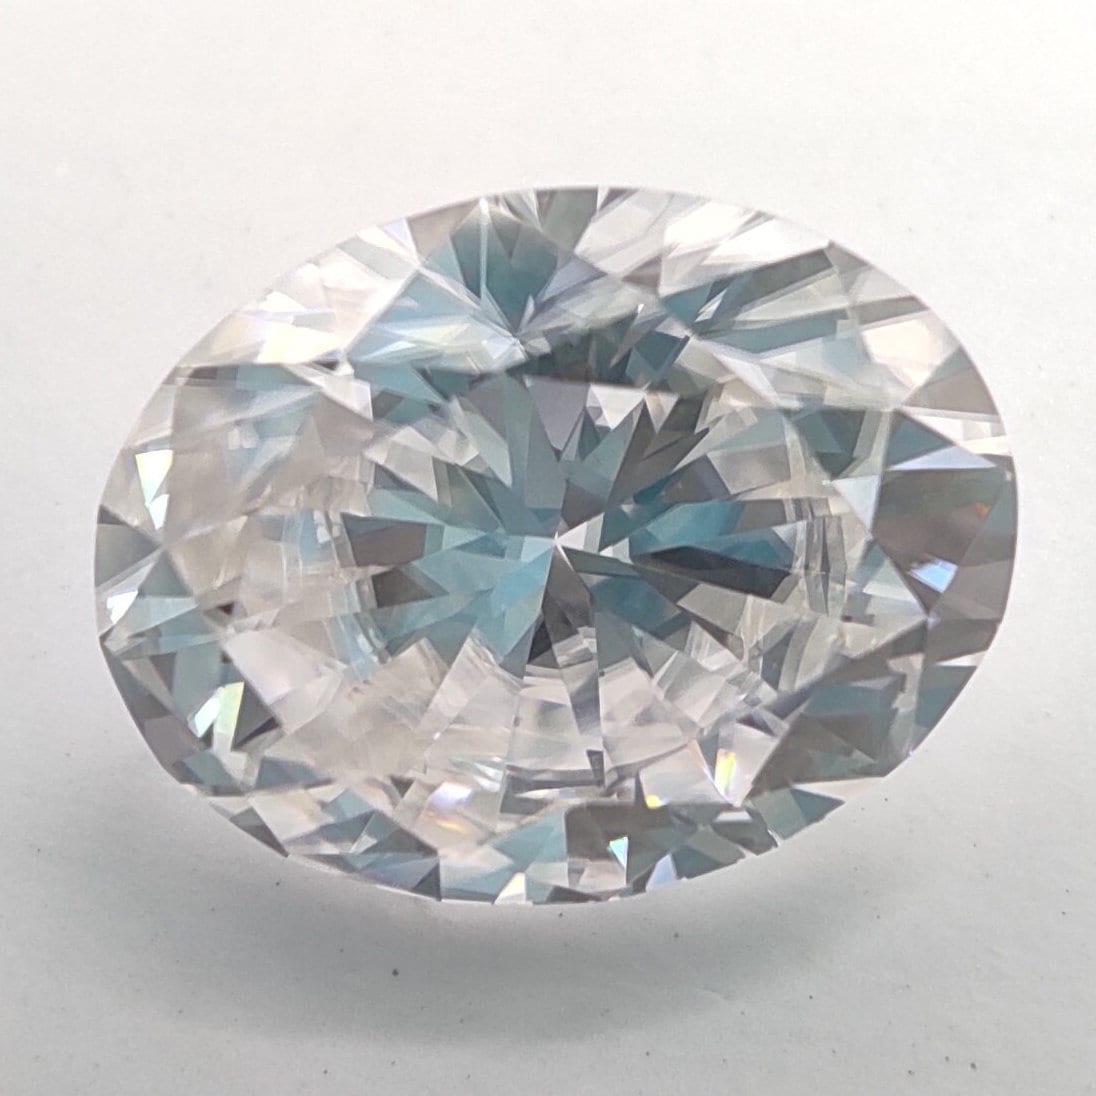 2 Carat (7x9mm) Moissanite Gemstone - Oval Cut Moissanite - Faceted Moissanite - Brilliant Moissanite for Jewelry - Oval Faceted - Lab Grown